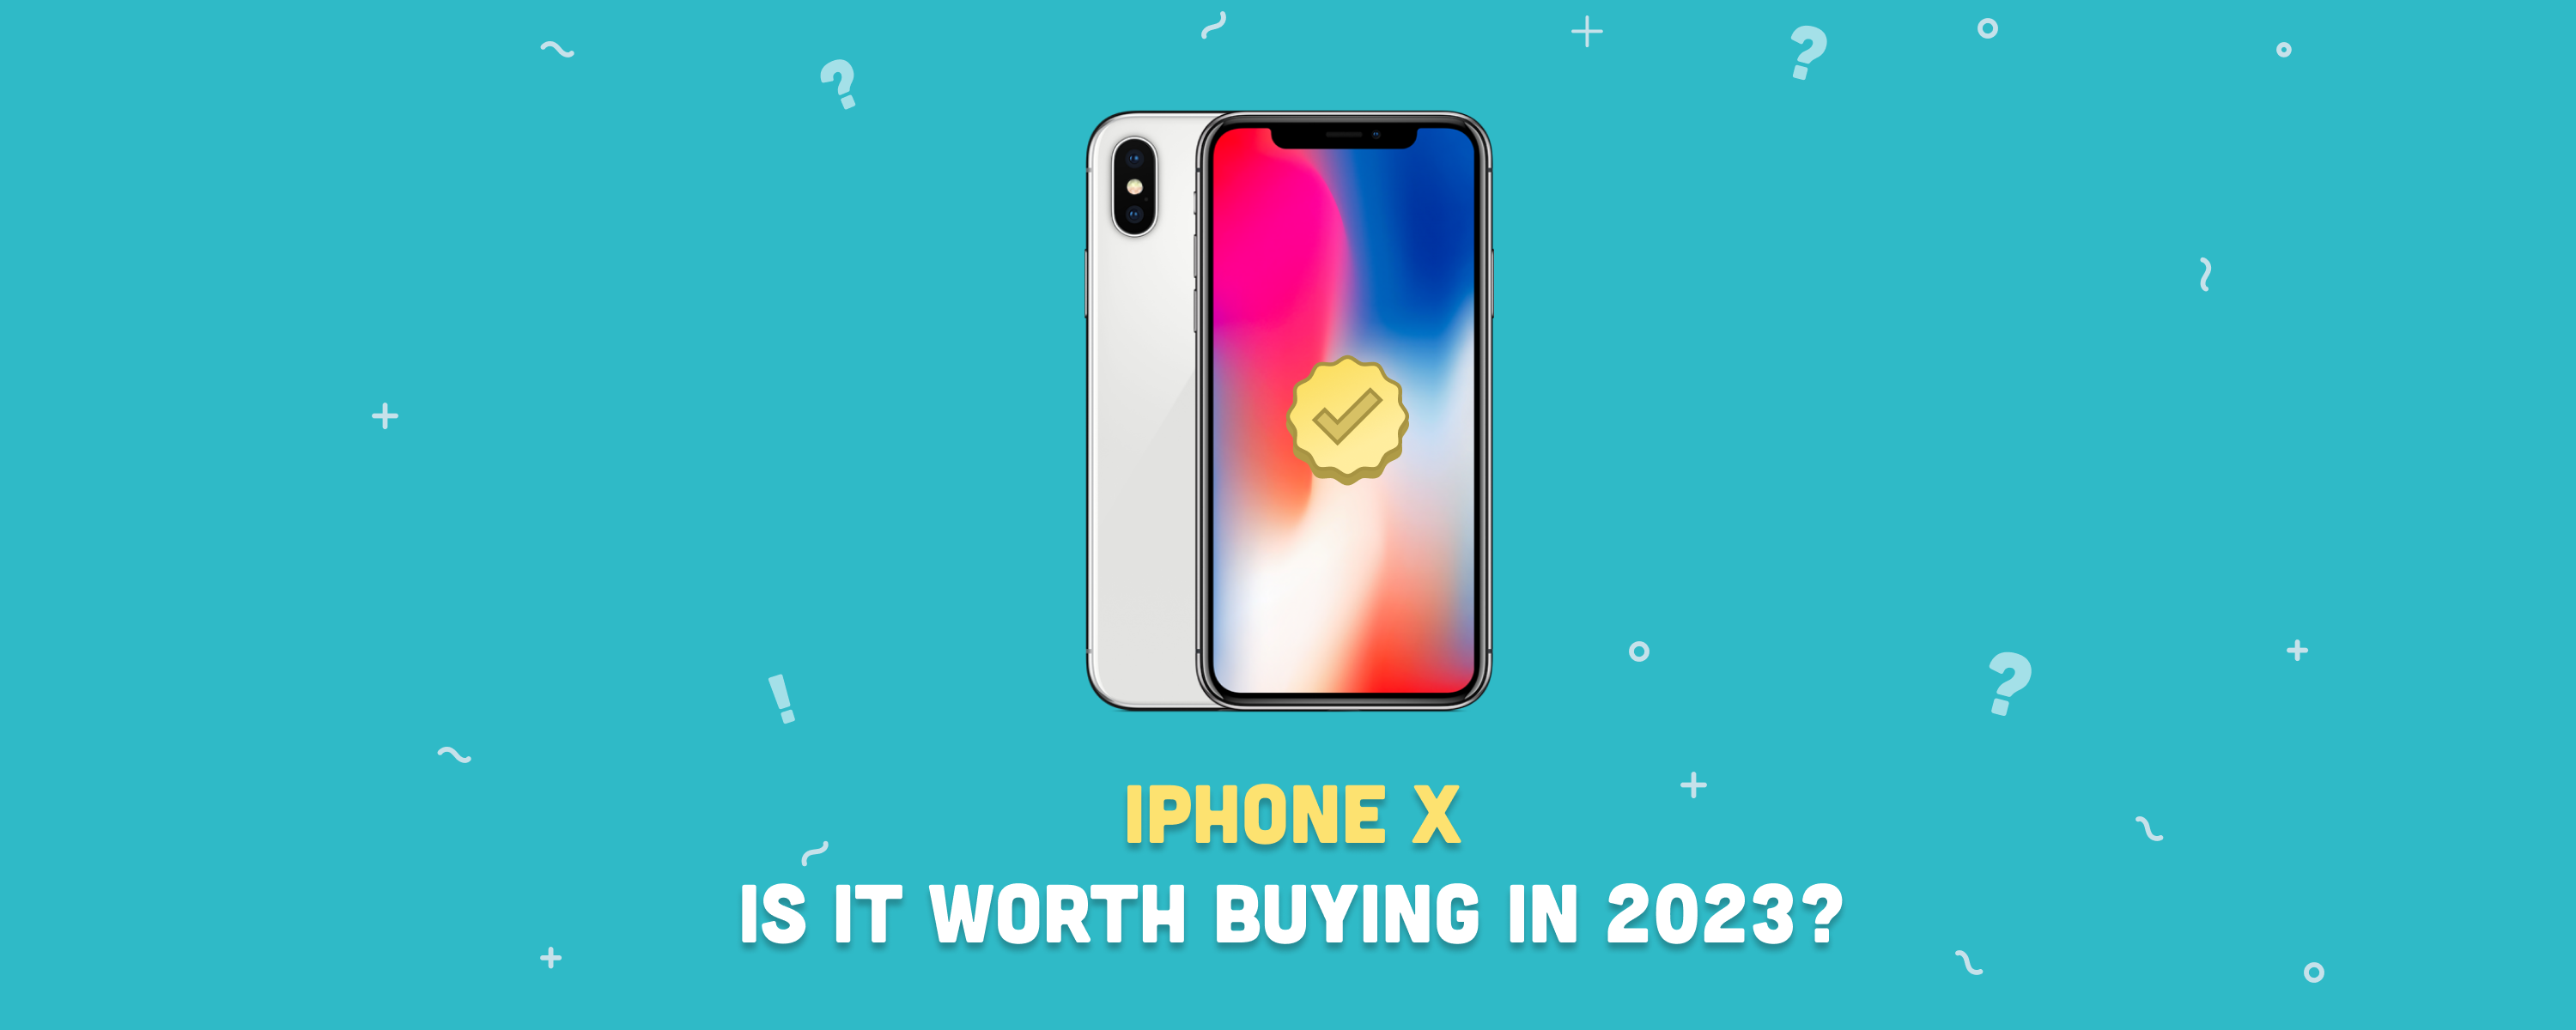 Is the iPhone X Worth Buying in 2023? | RefurbMe Blog